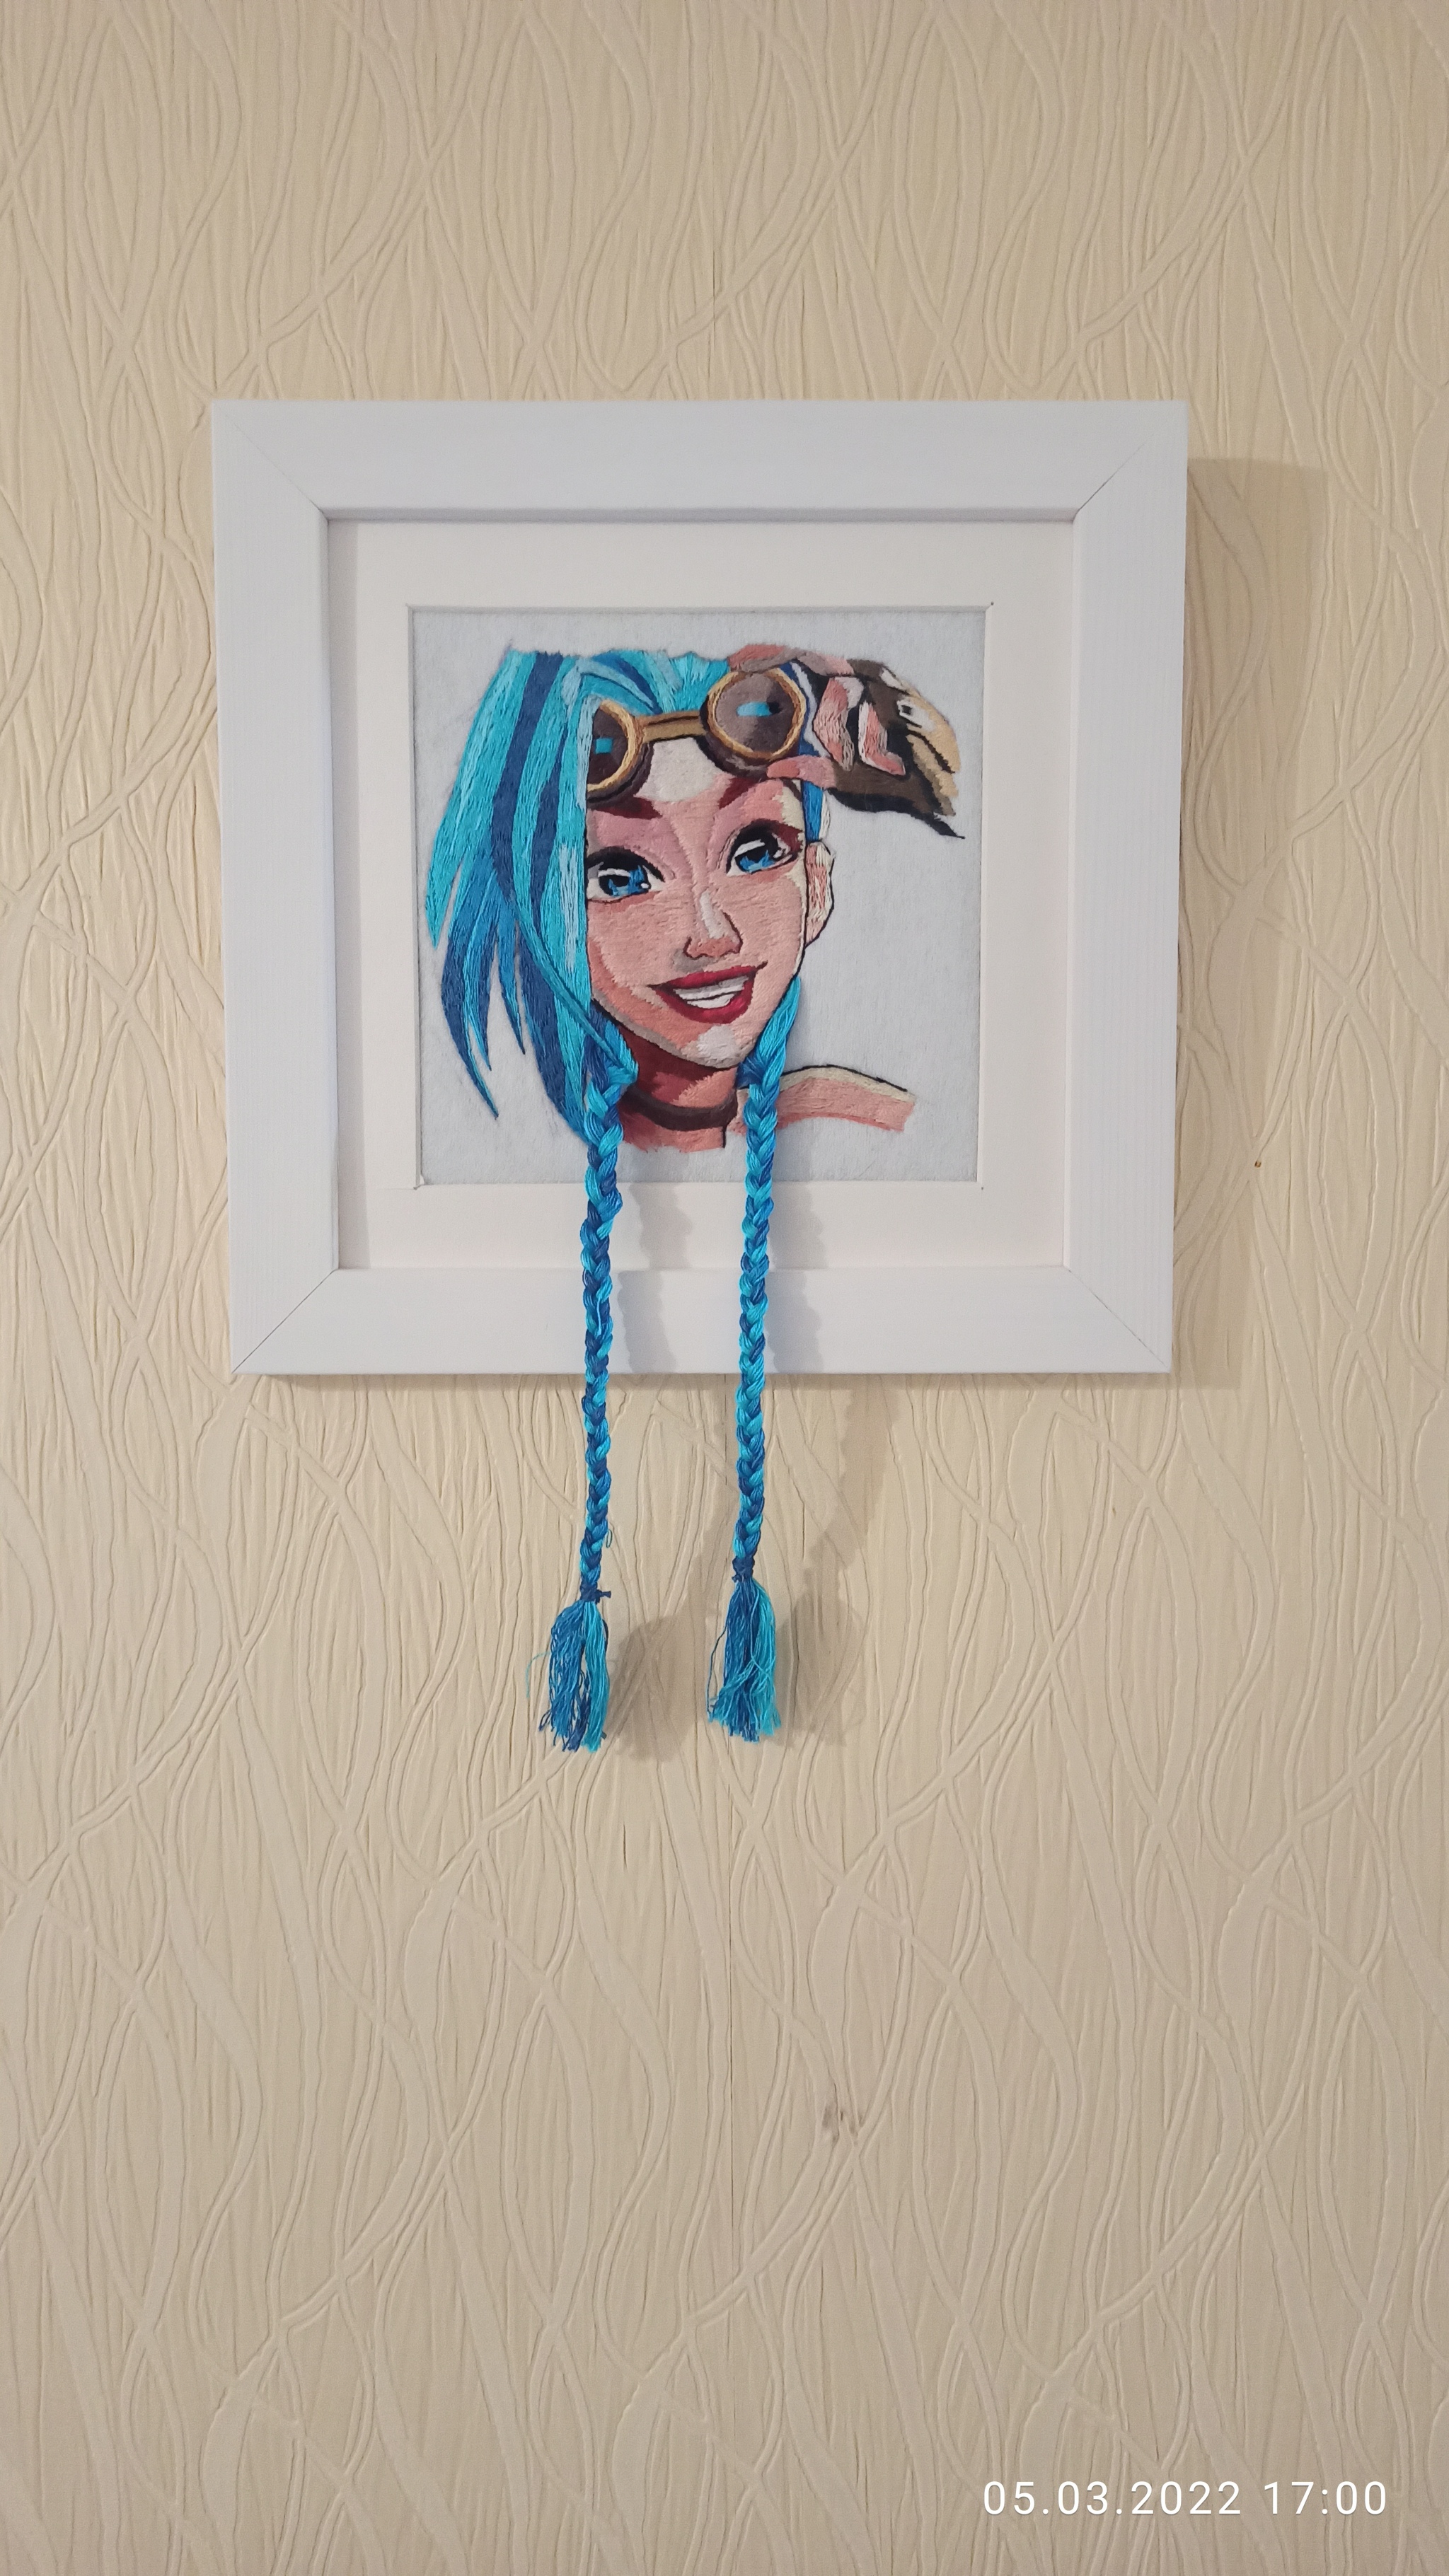 Response to the post My favorite embroidery. Jinx of Arcane - My, Embroidery, Needlework, Handmade, Needlework without process, Jinx, Arcane, League of legends, Netflix, Anime, Satin stitch embroidery, Smooth, Art, Games, Gamers, Gamer Girls, Creation, Game art, Riot games, Reply to post, Longpost, 